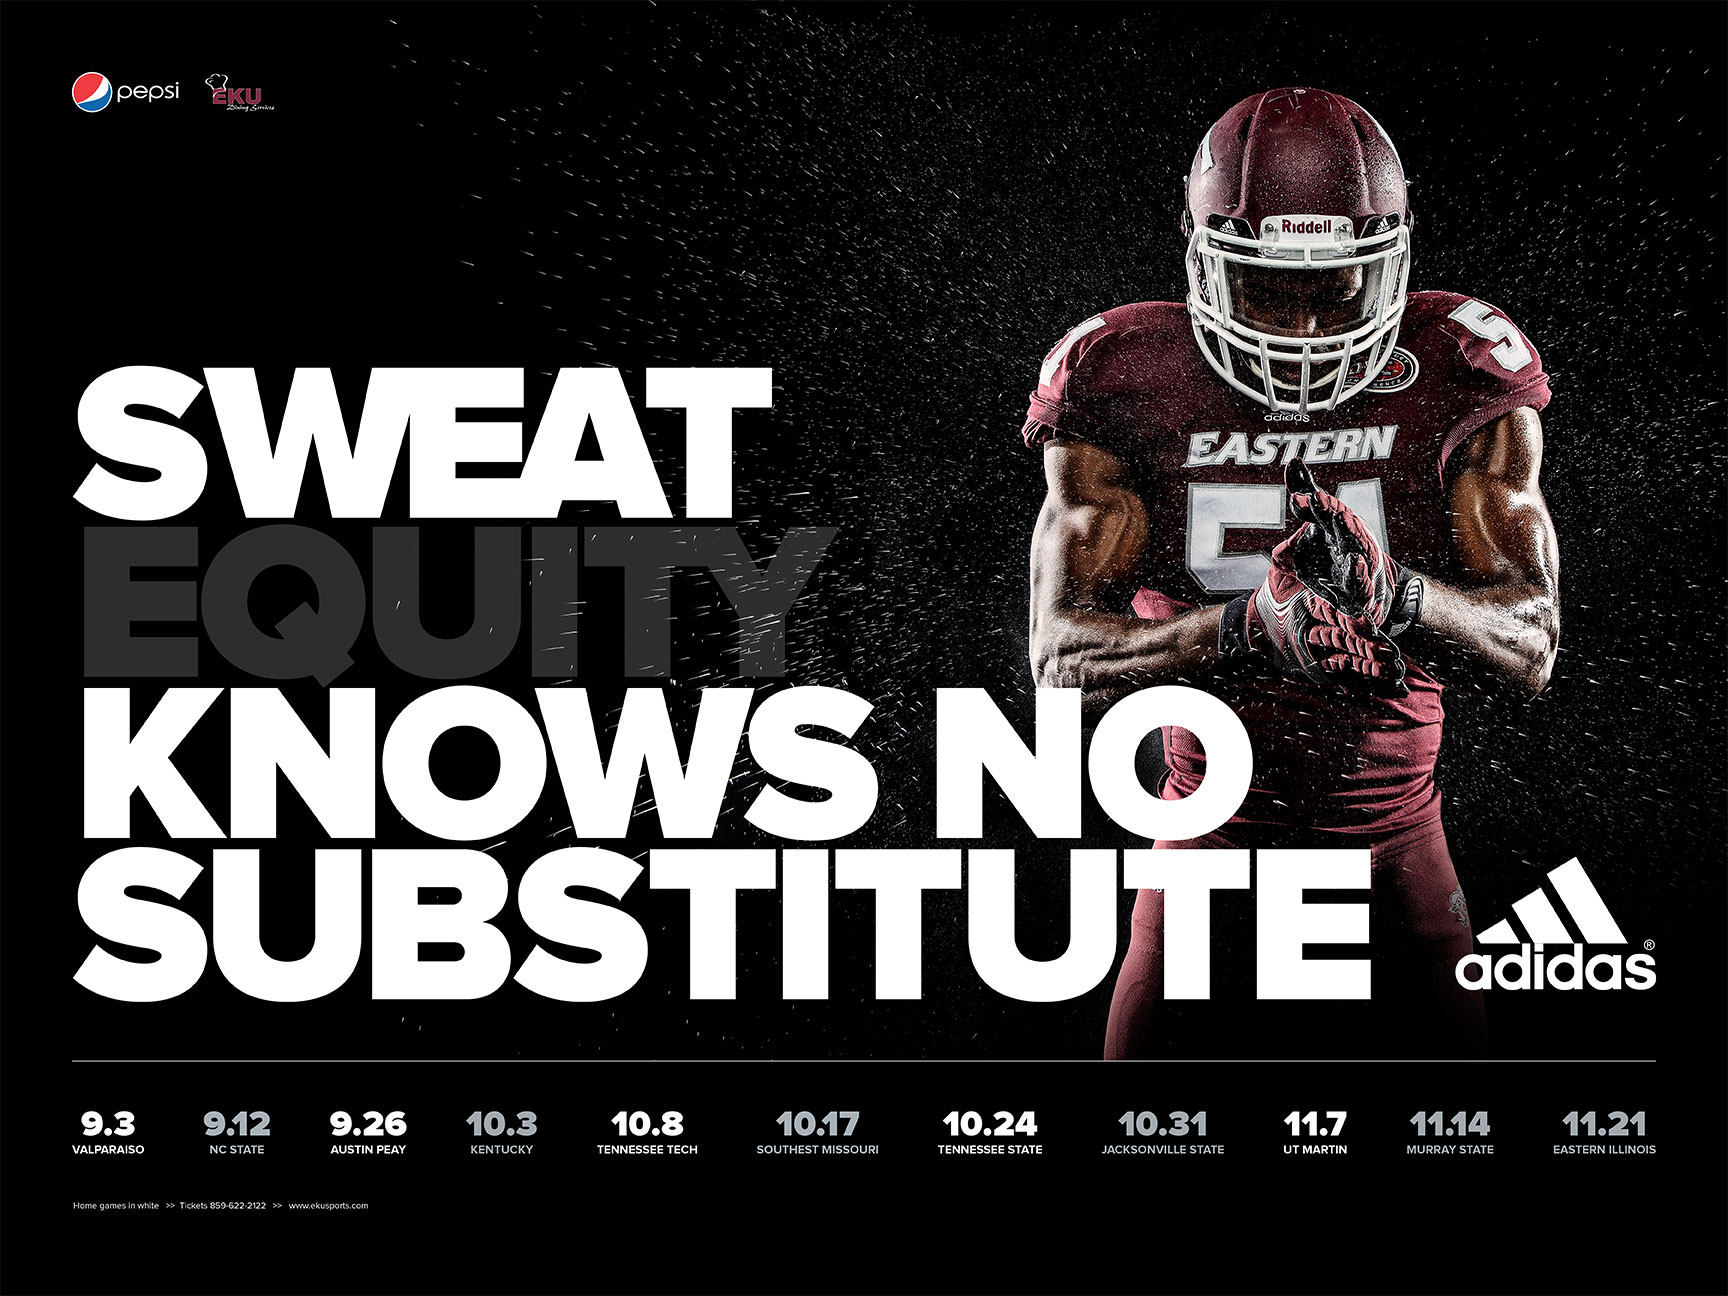 2015 EKU Football Schedule Poster Concept by Adam Martin on Dribbble